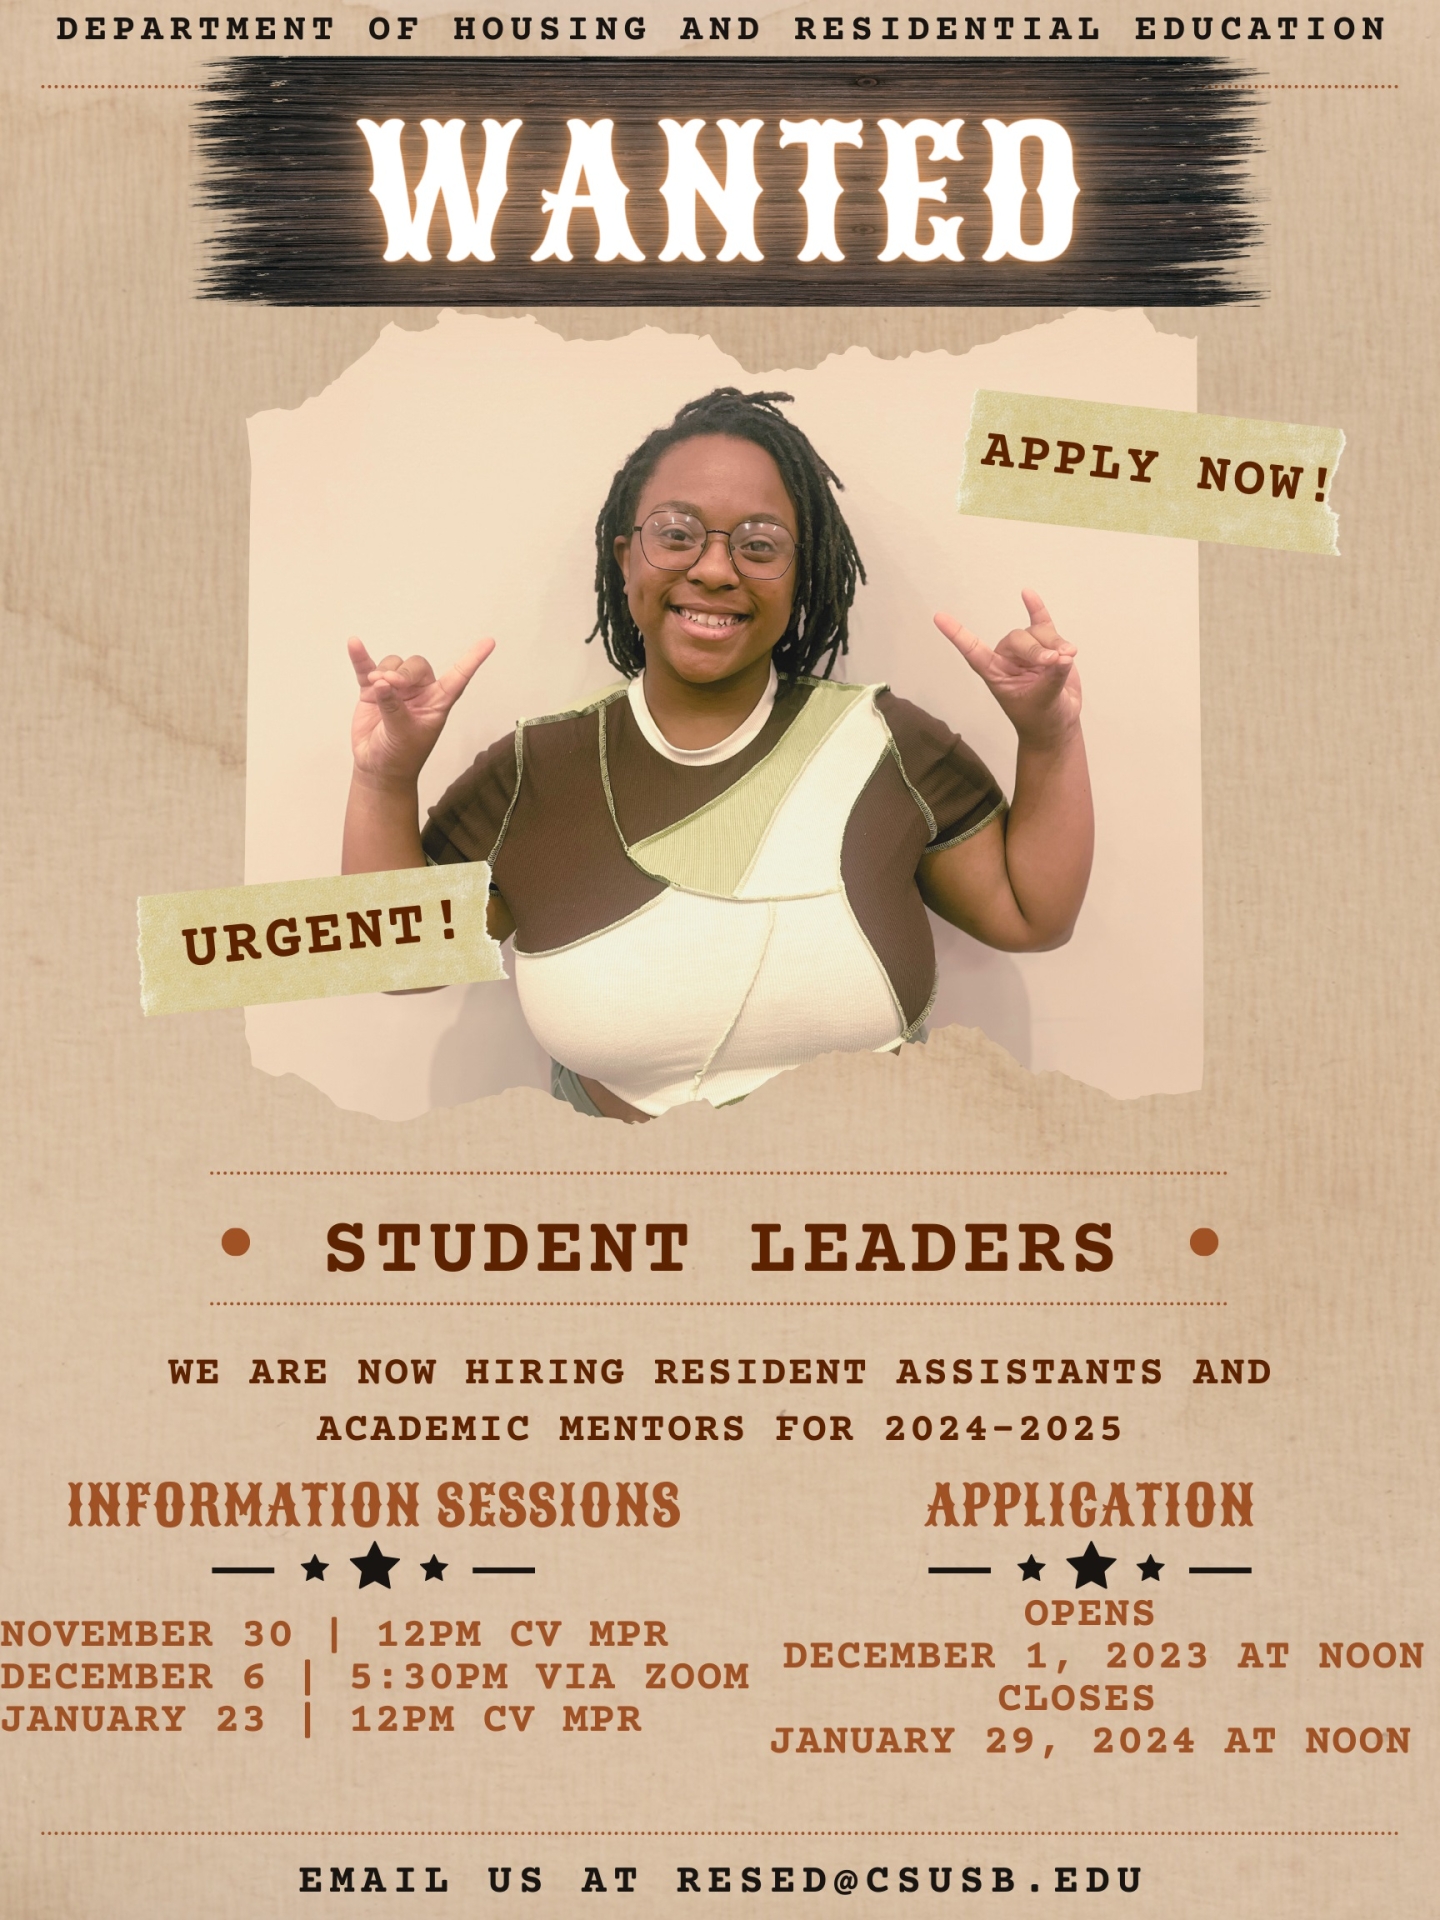 Department of Housing and Residential Education, Wanted: Apply now, Student leaders. We are now hiring Resident Assistants and Academic Mentors for 2024-2025. Information Sessions November 30, 12pm CV MPR, December 6, 5:30pm via zoom, January 23, 12pm CV MPR. Application opens December 1, 2023 at noon, closes January 29, 2024 at noon. Email us at resed@csusb.edu